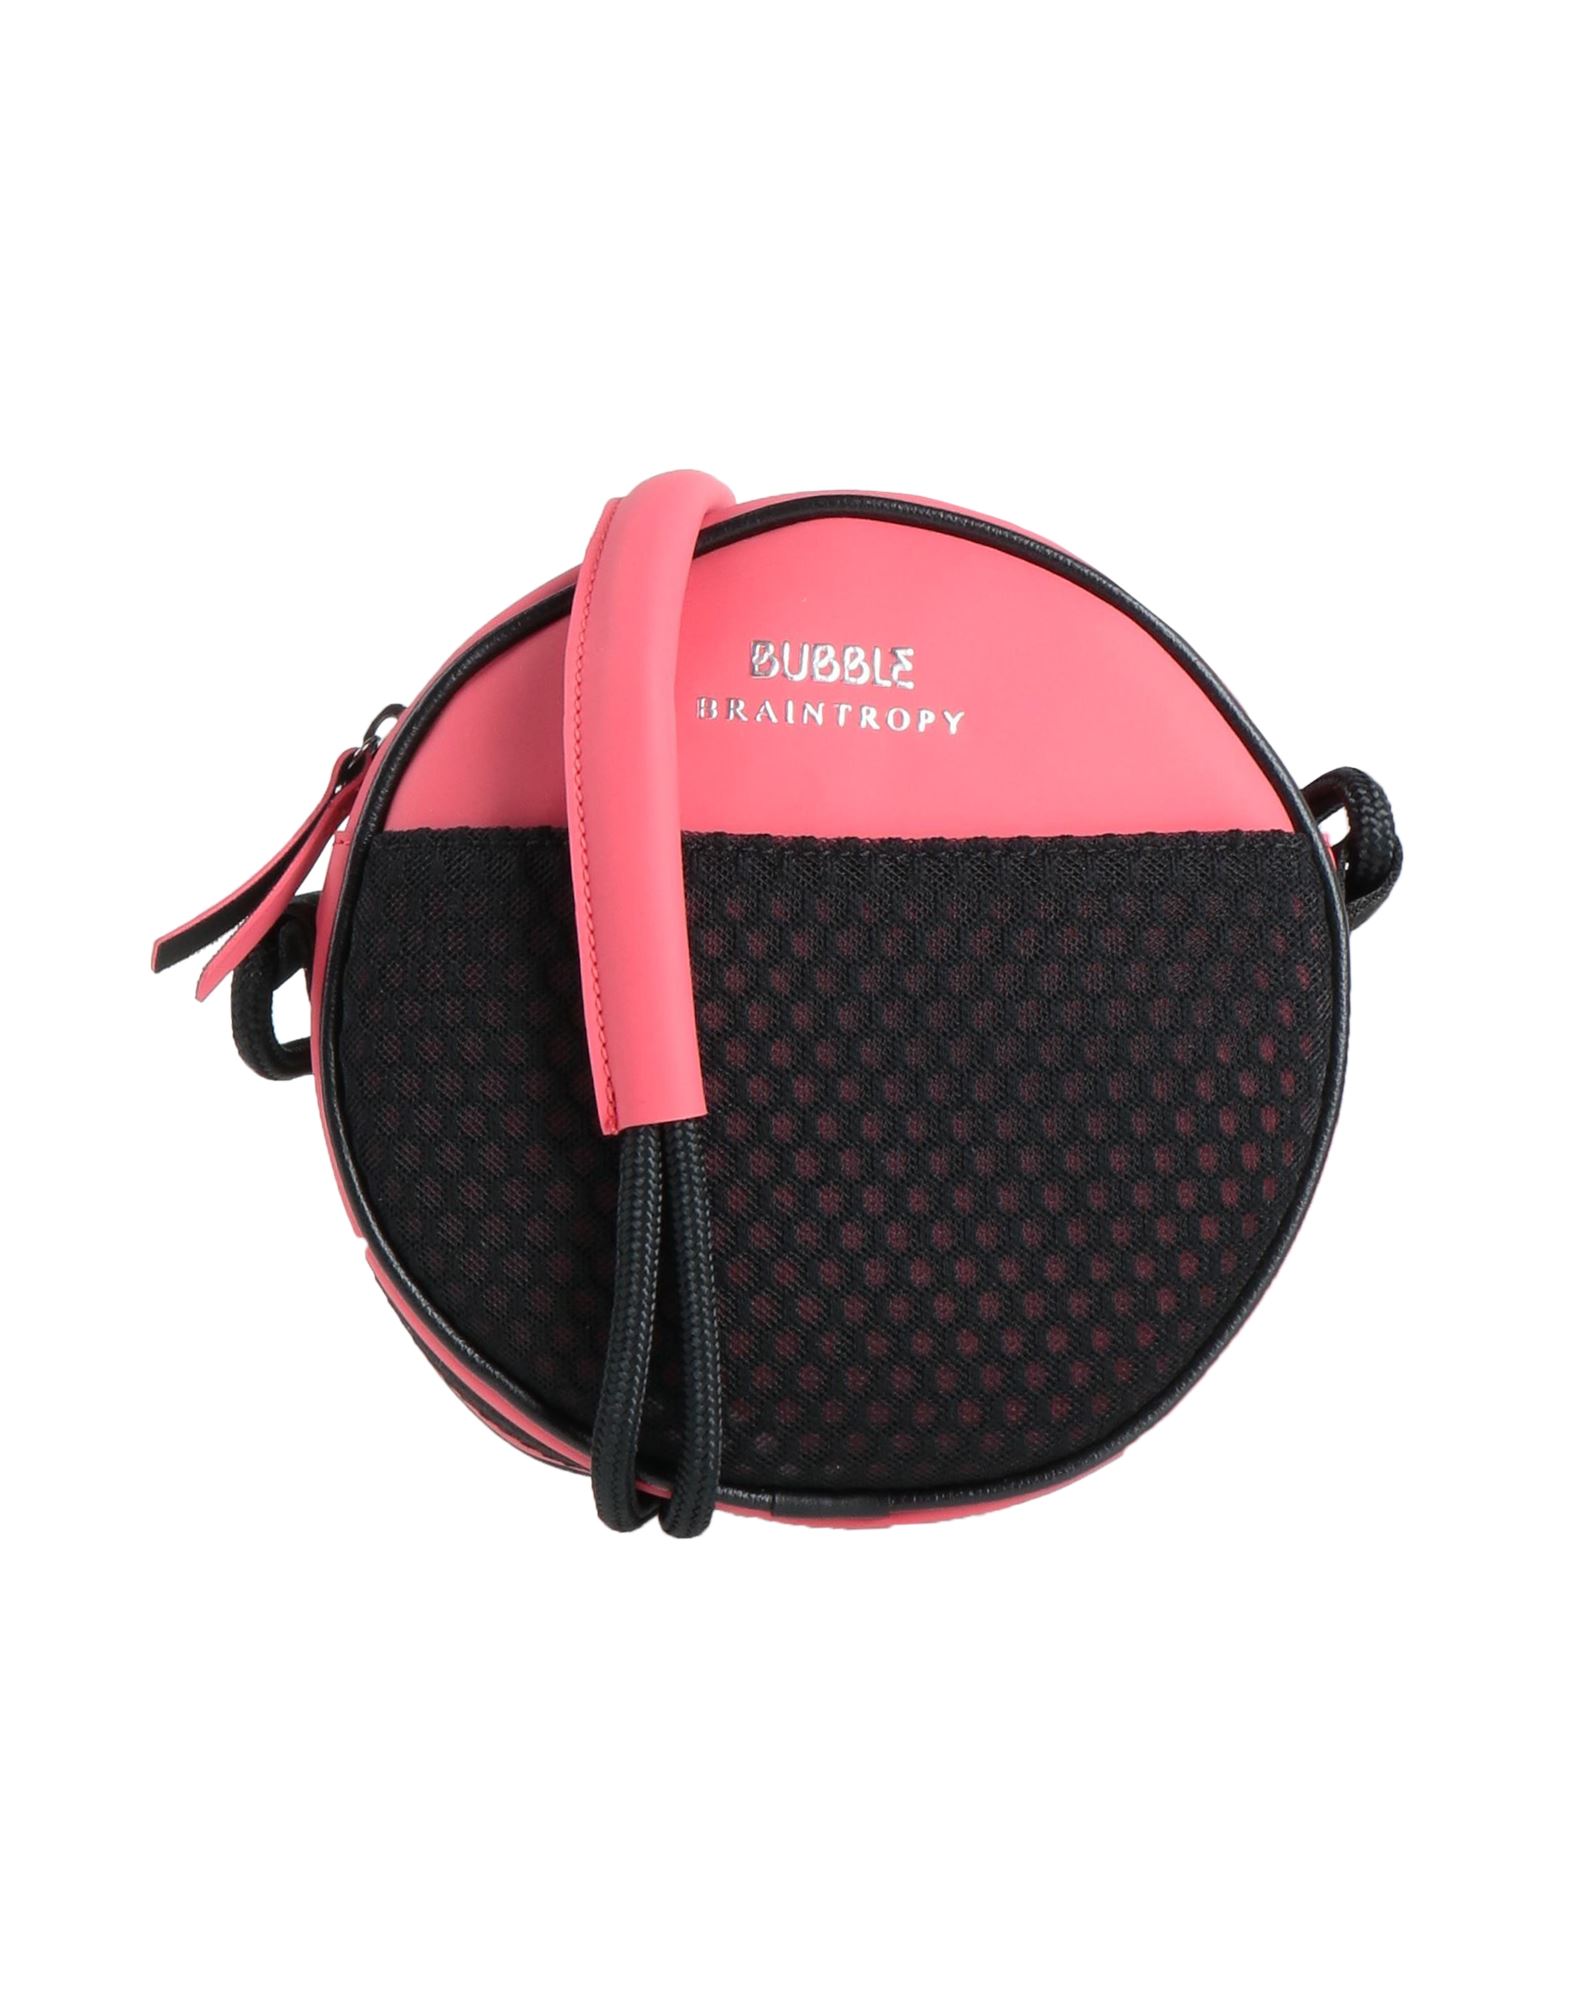 Bubble By Braintropy Handbags In Coral